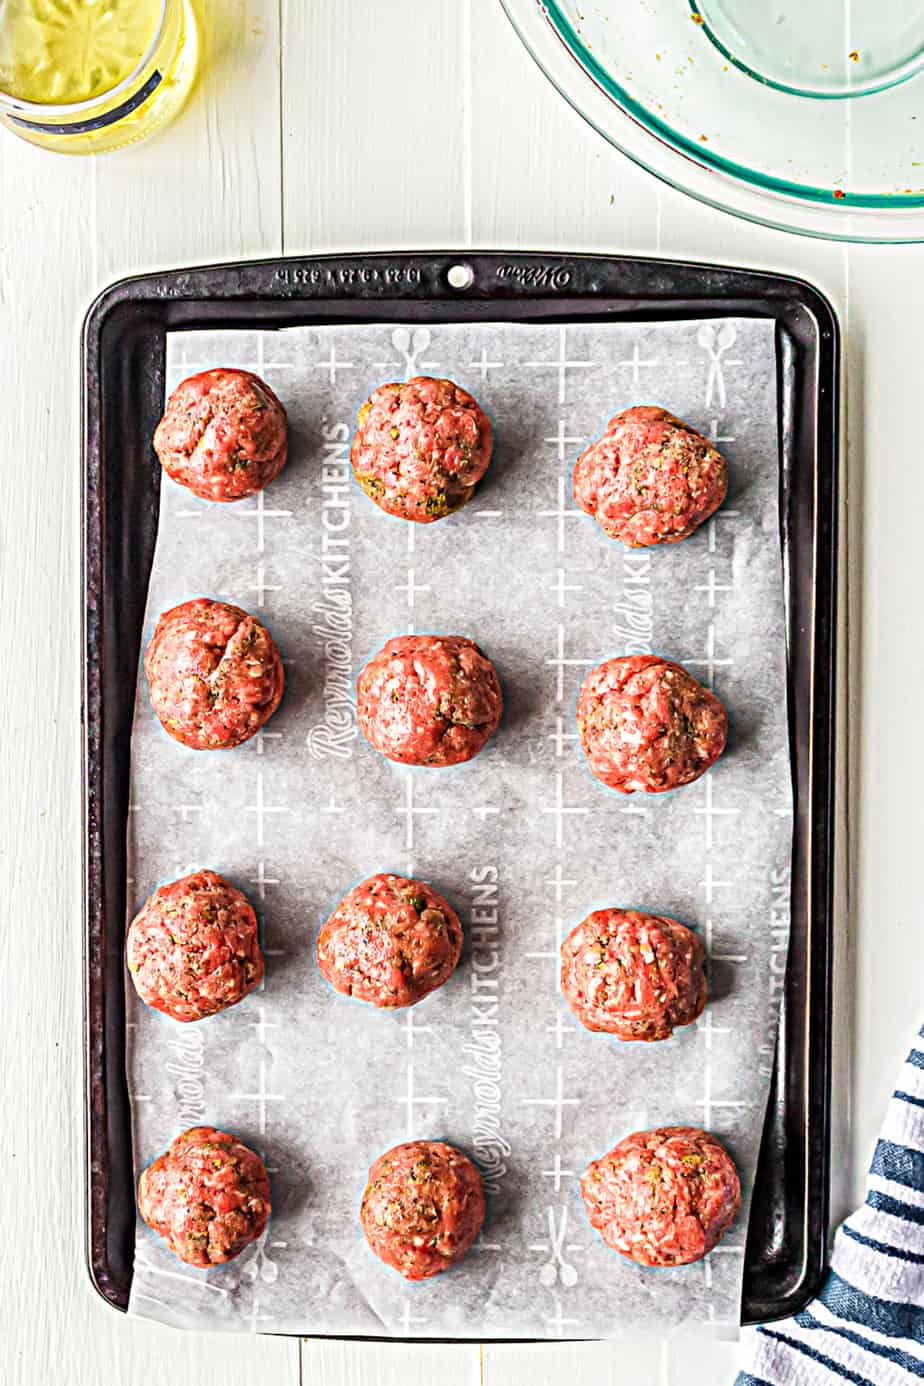 Overhead look at twelve raw meatballs on a baking pan lined with parchment paper.